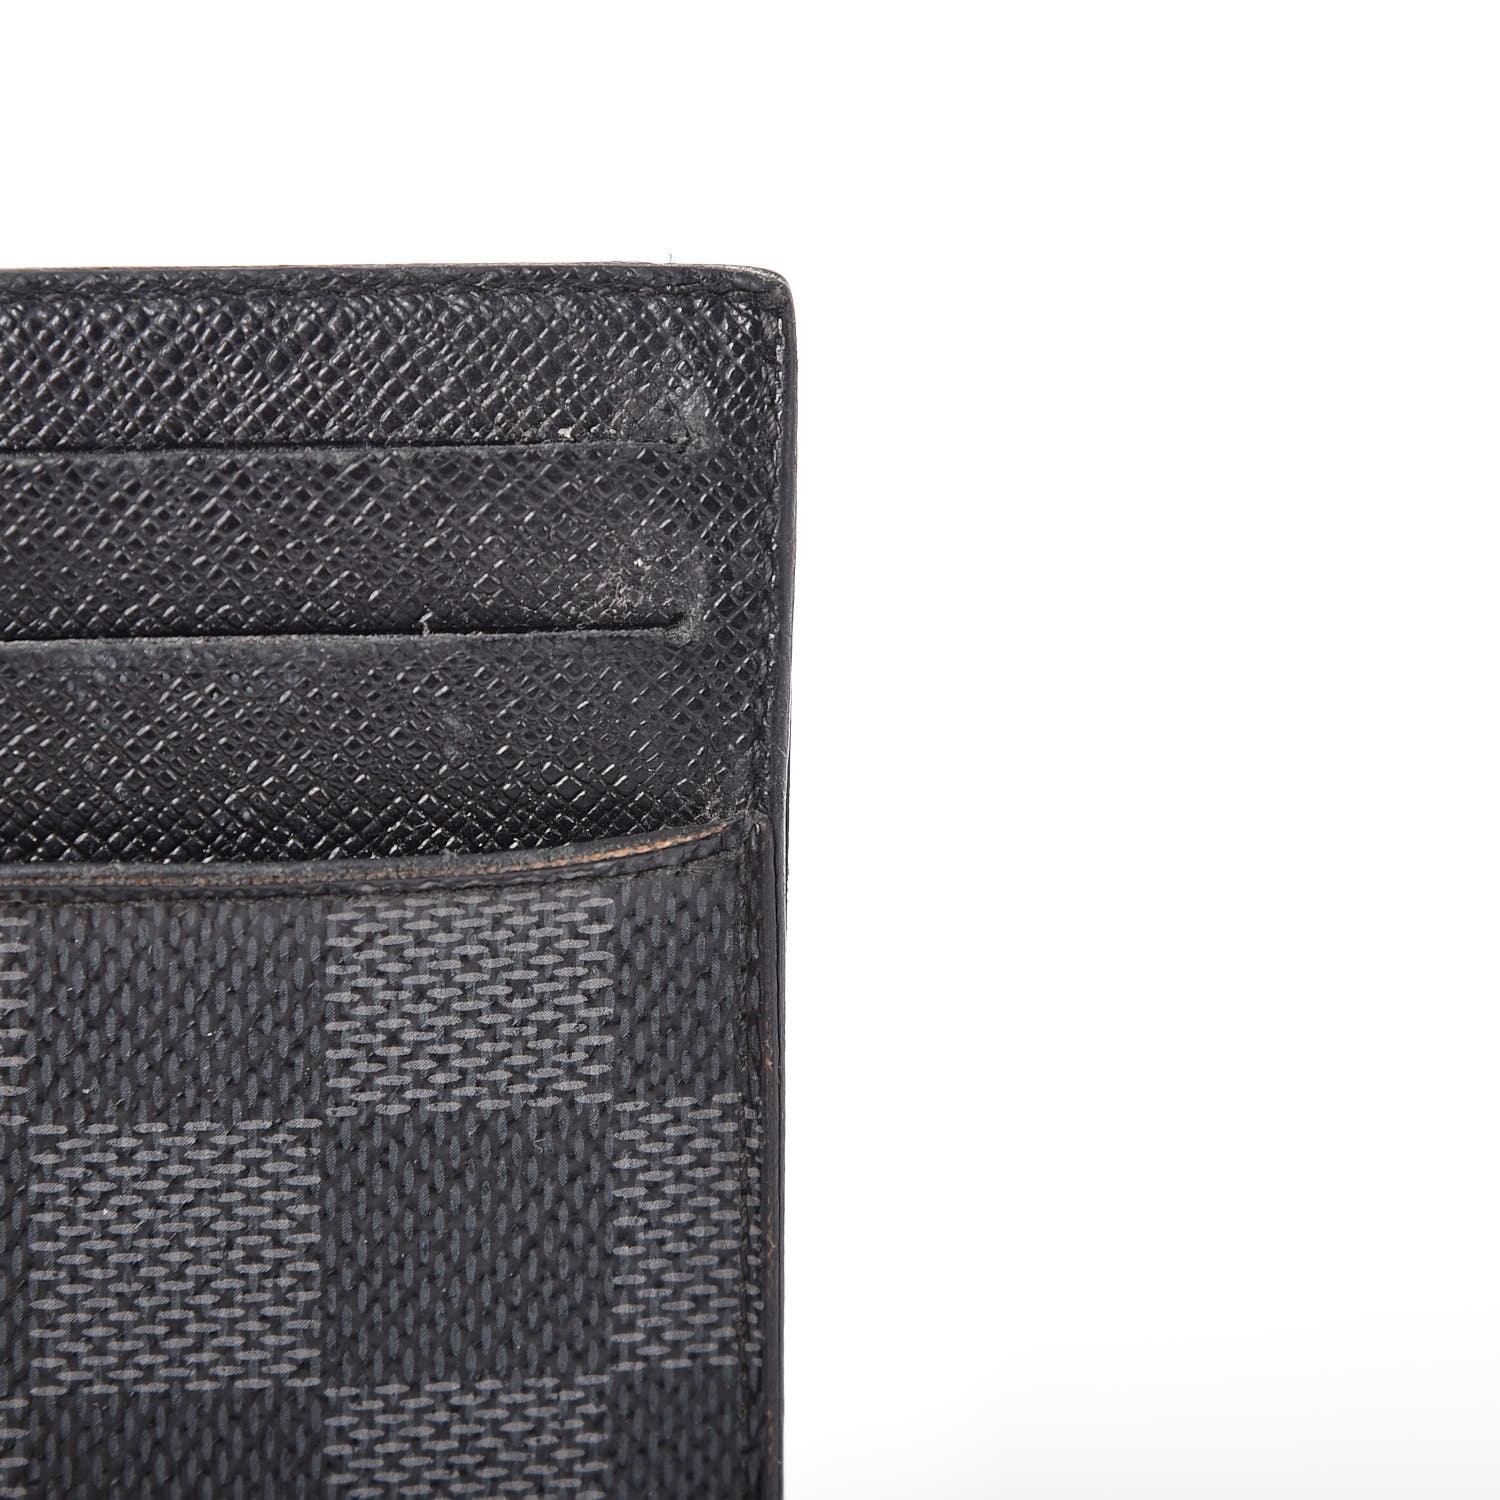 Neo Porte Cartes Damier Graphite Canvas - Wallets and Small Leather Goods